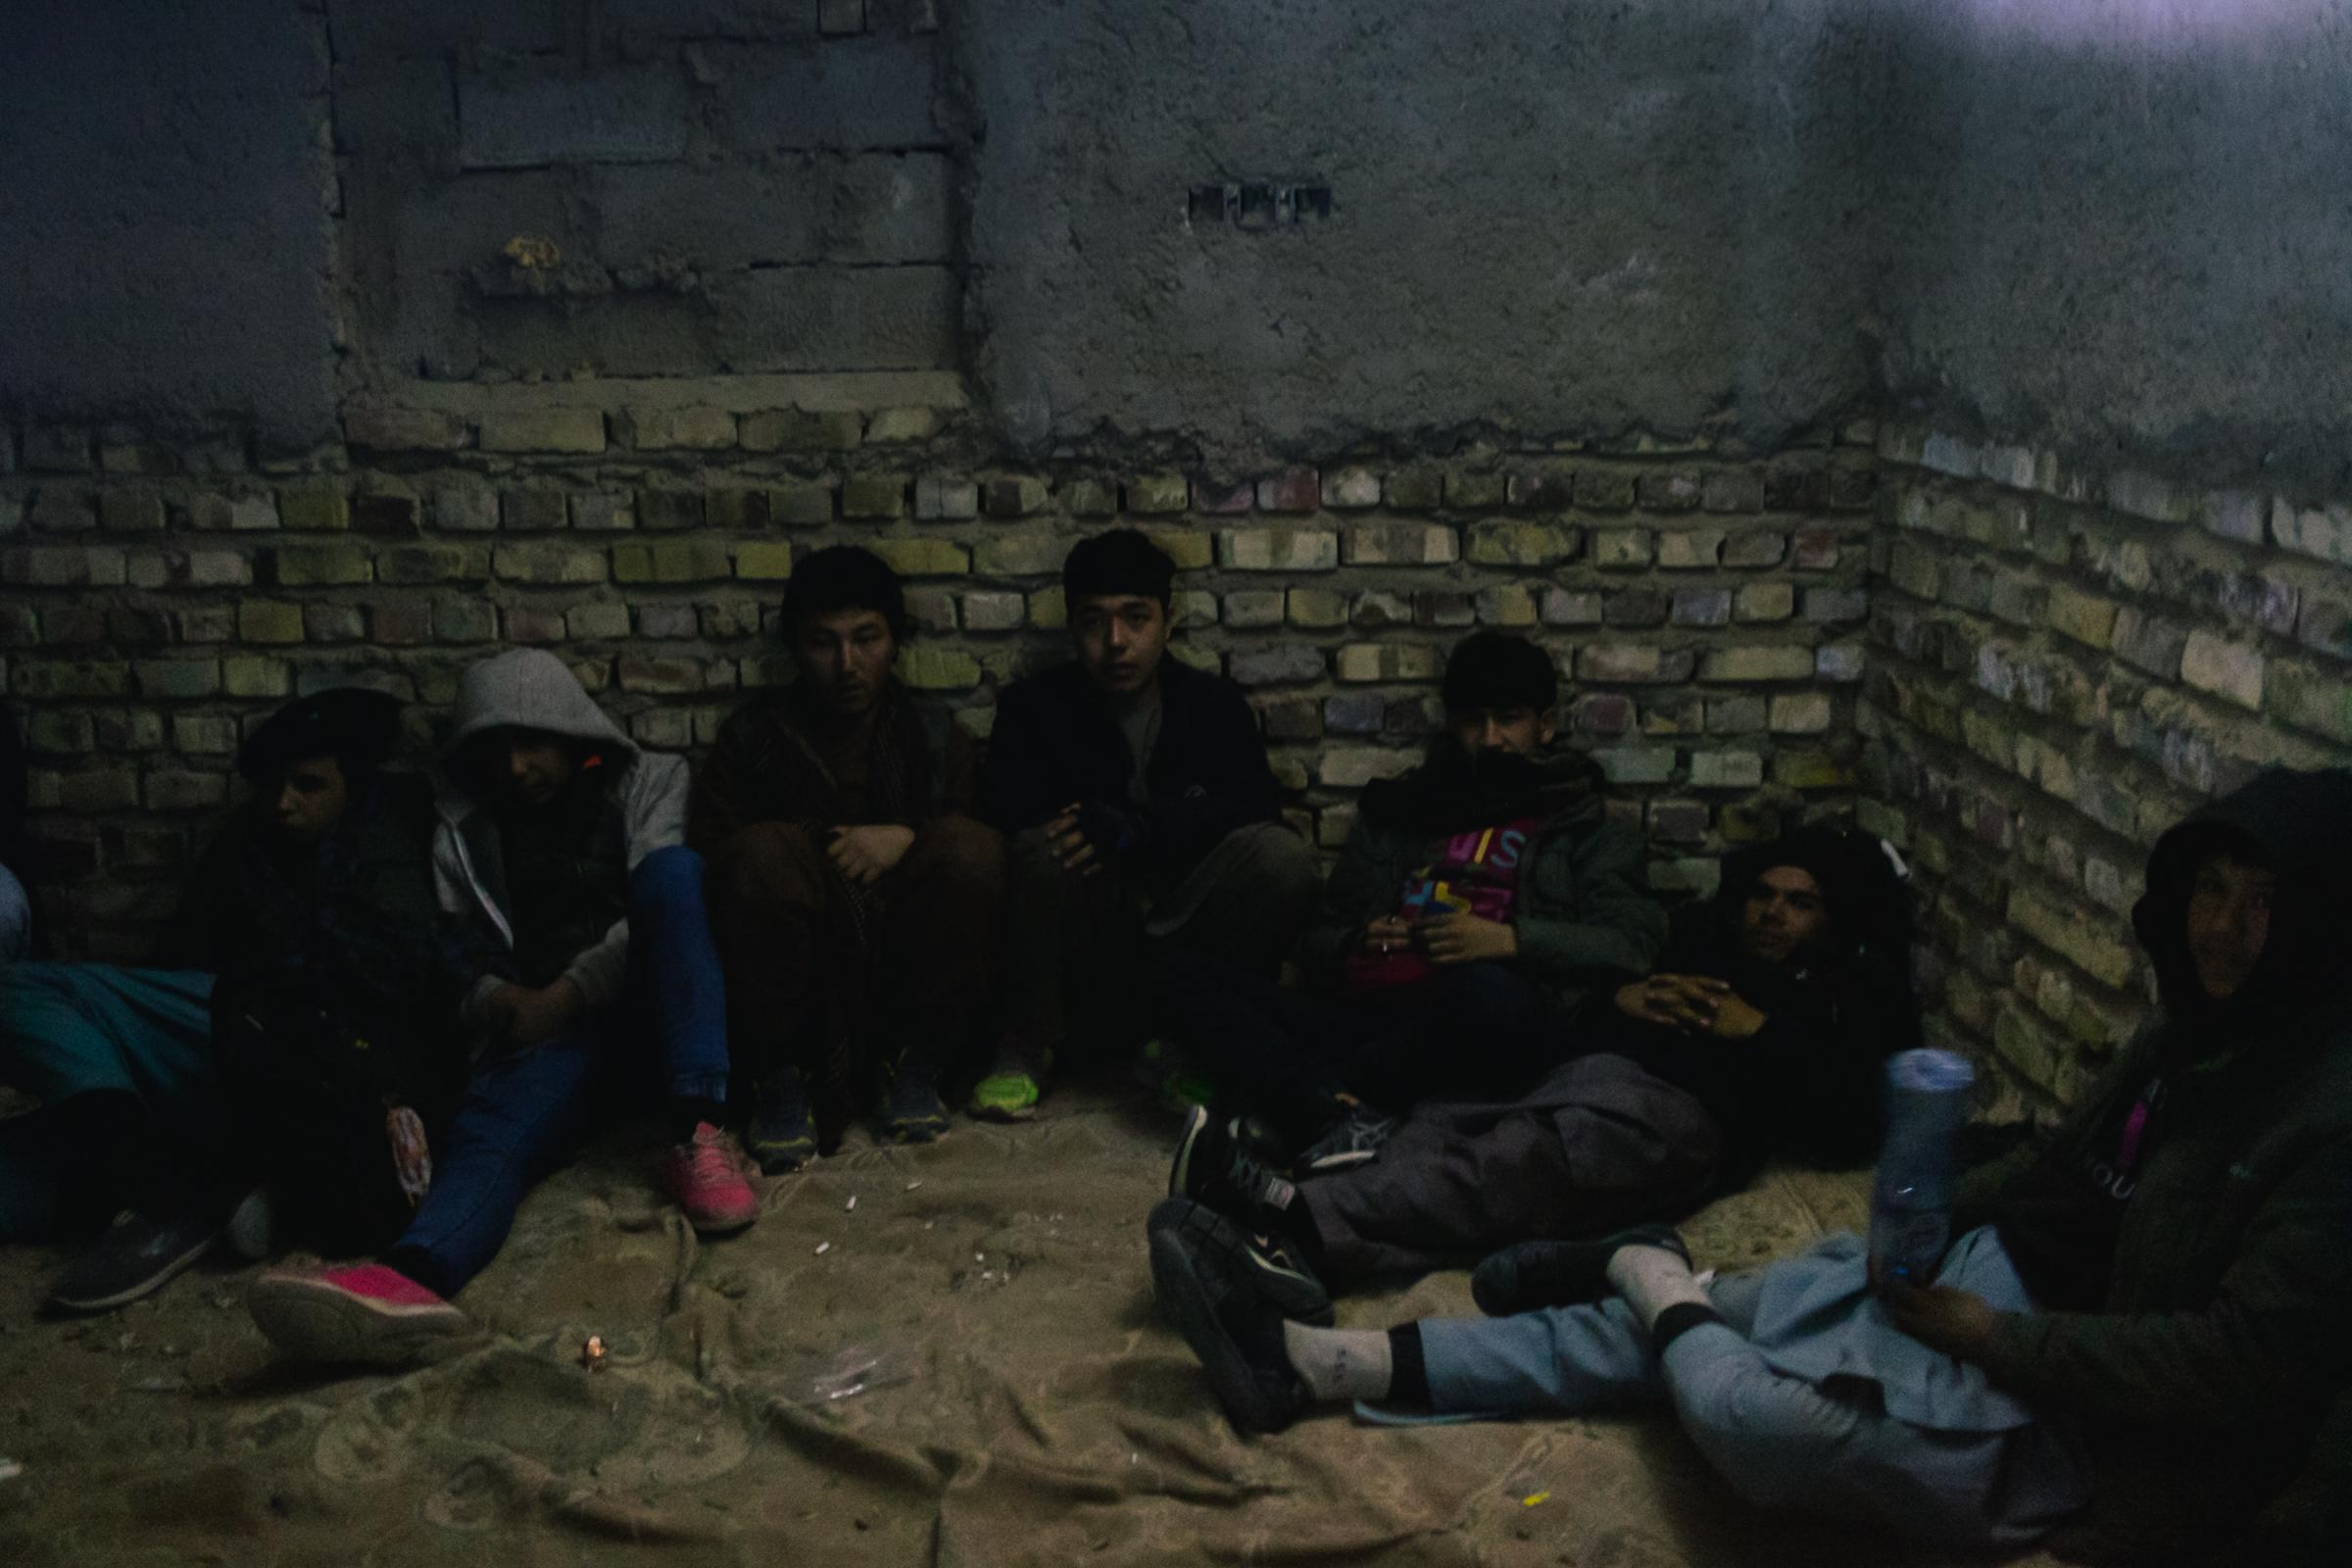 A few hundred yards from the Iranian border away, a group of young Afghans wait in a safe house...